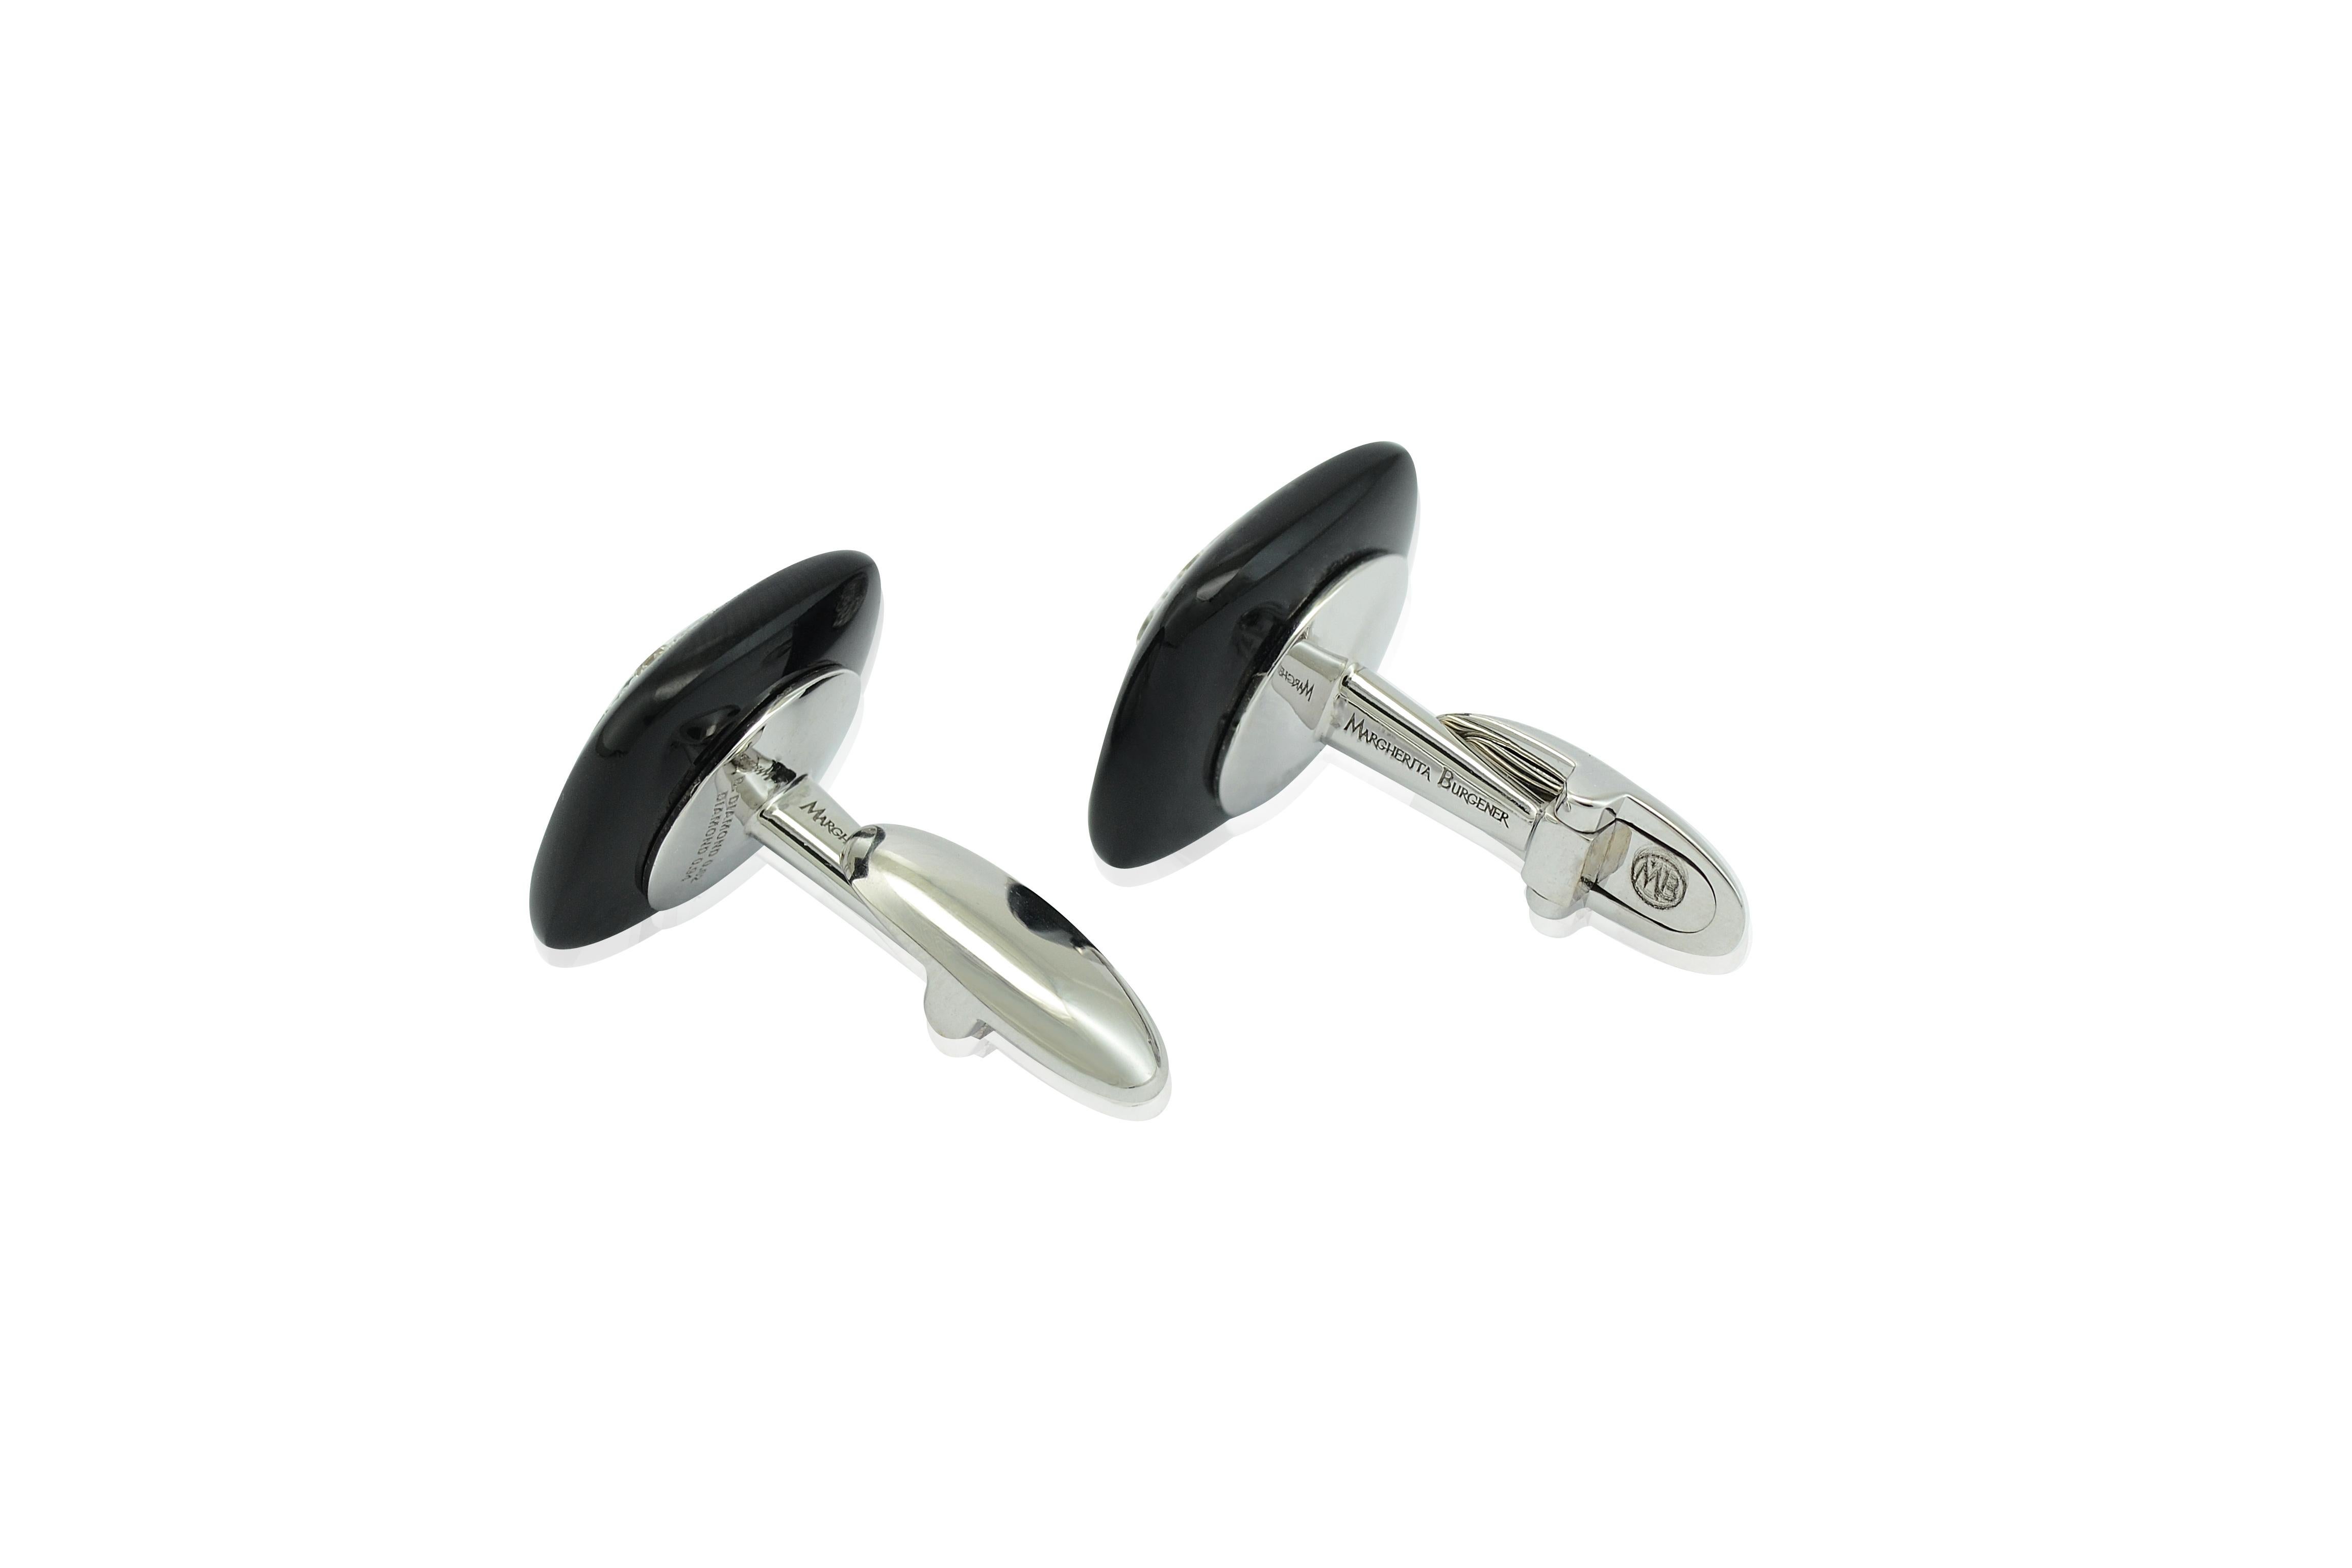 Handcrafted in Italy in Margherita Burgener workshop, the lovely pair of onyx cufflinks features  at the center a round black diamond and 8 white diamonds all around, set in white gold
The onyx measures 0.59 by 0.59 inches.
T bar is palne gold. you